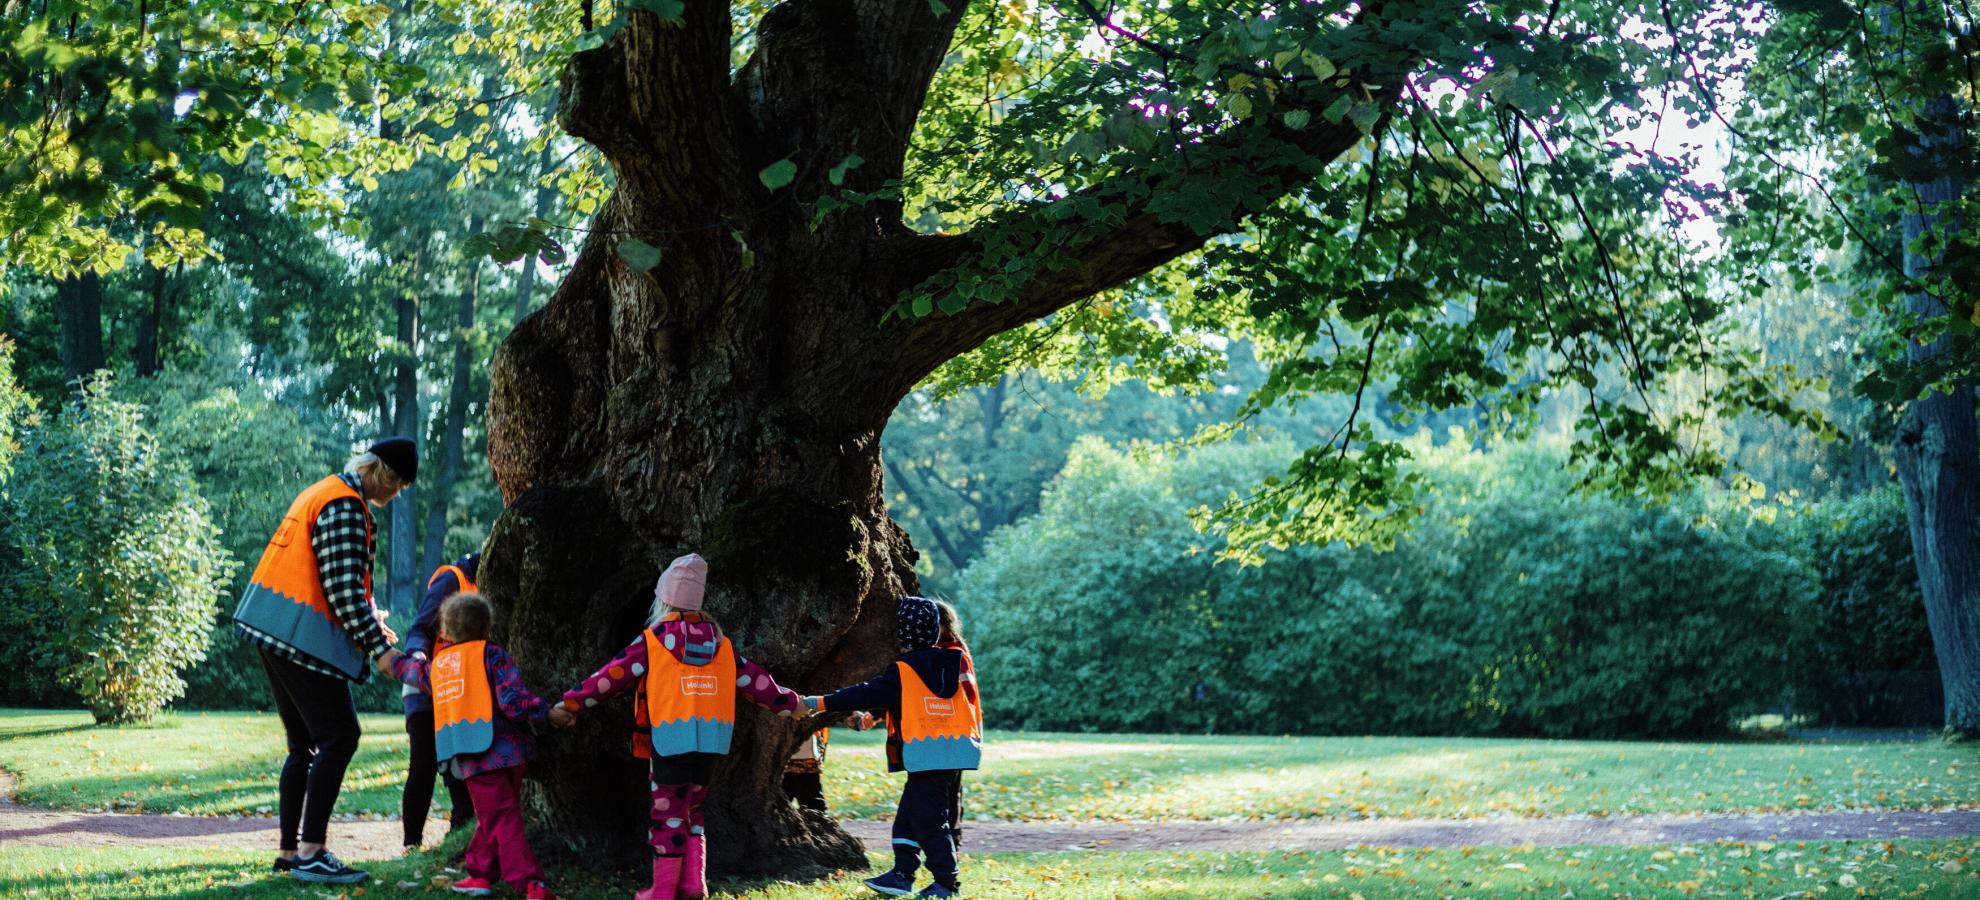 Whilst on a trip to the park with daycare, a small group of kids and a carer are standing around a large tree and holding hands.